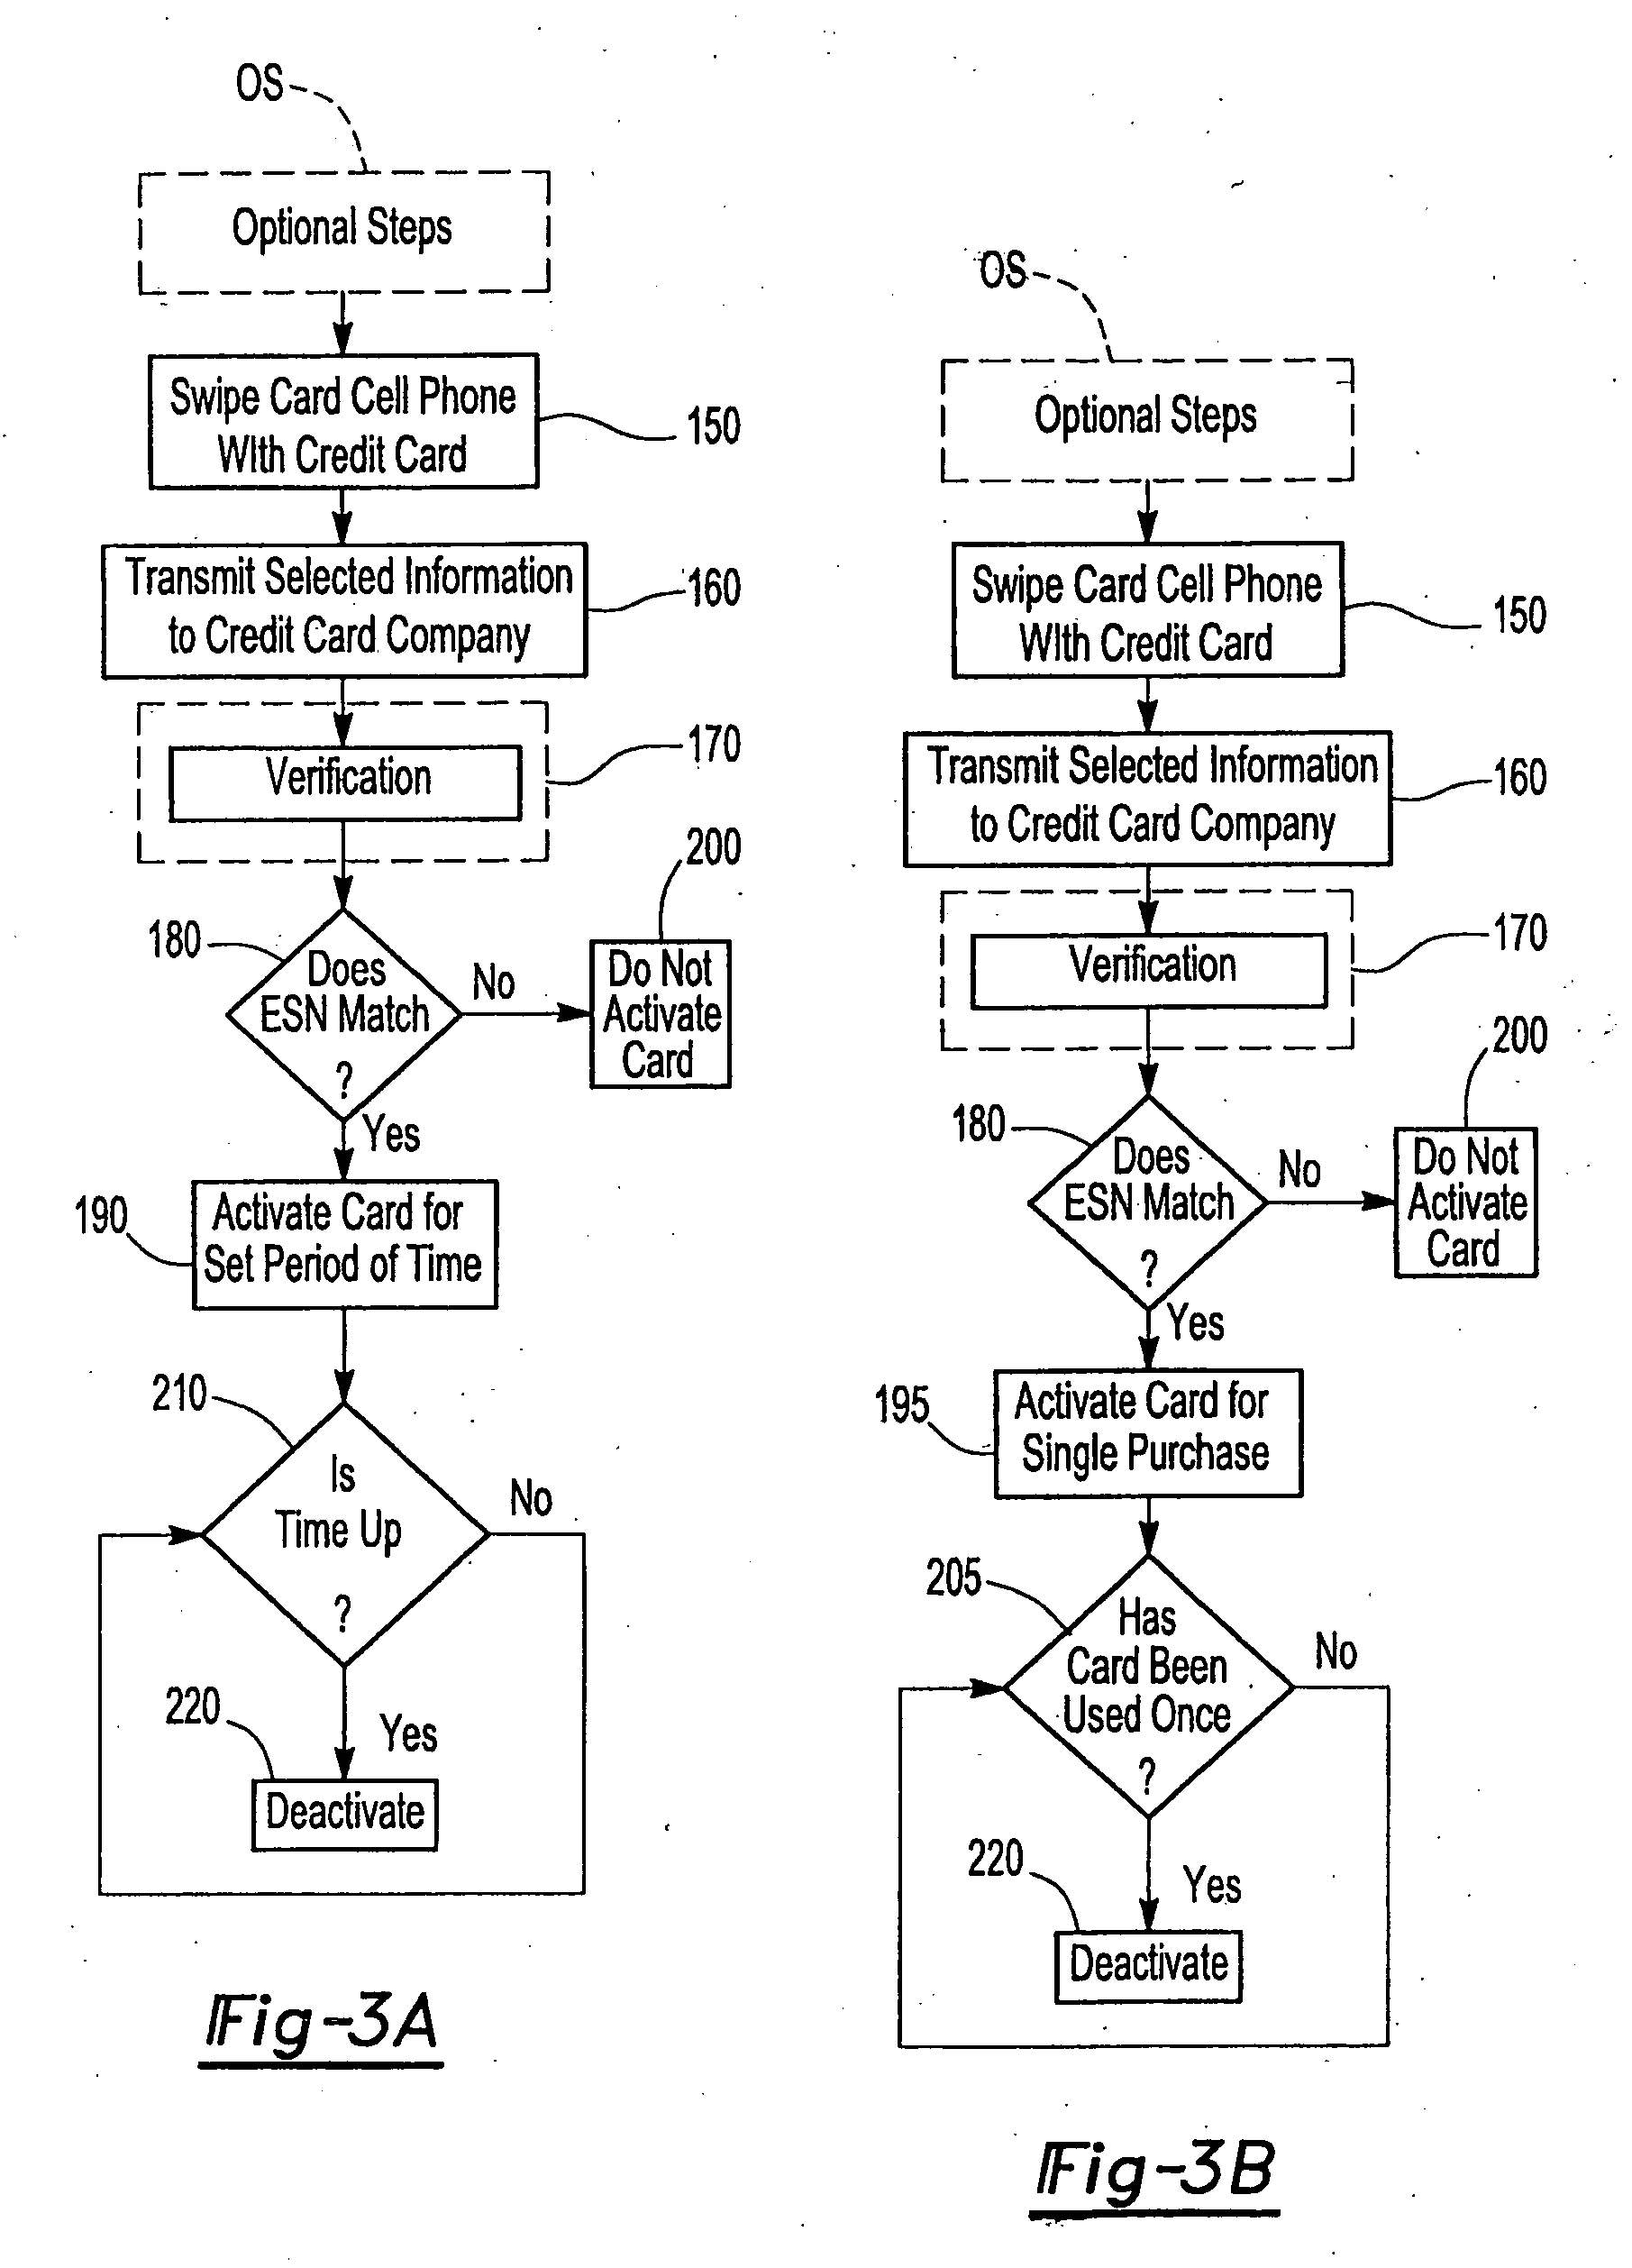 Method and apparatus for securely activating a credit card for a limited period of time